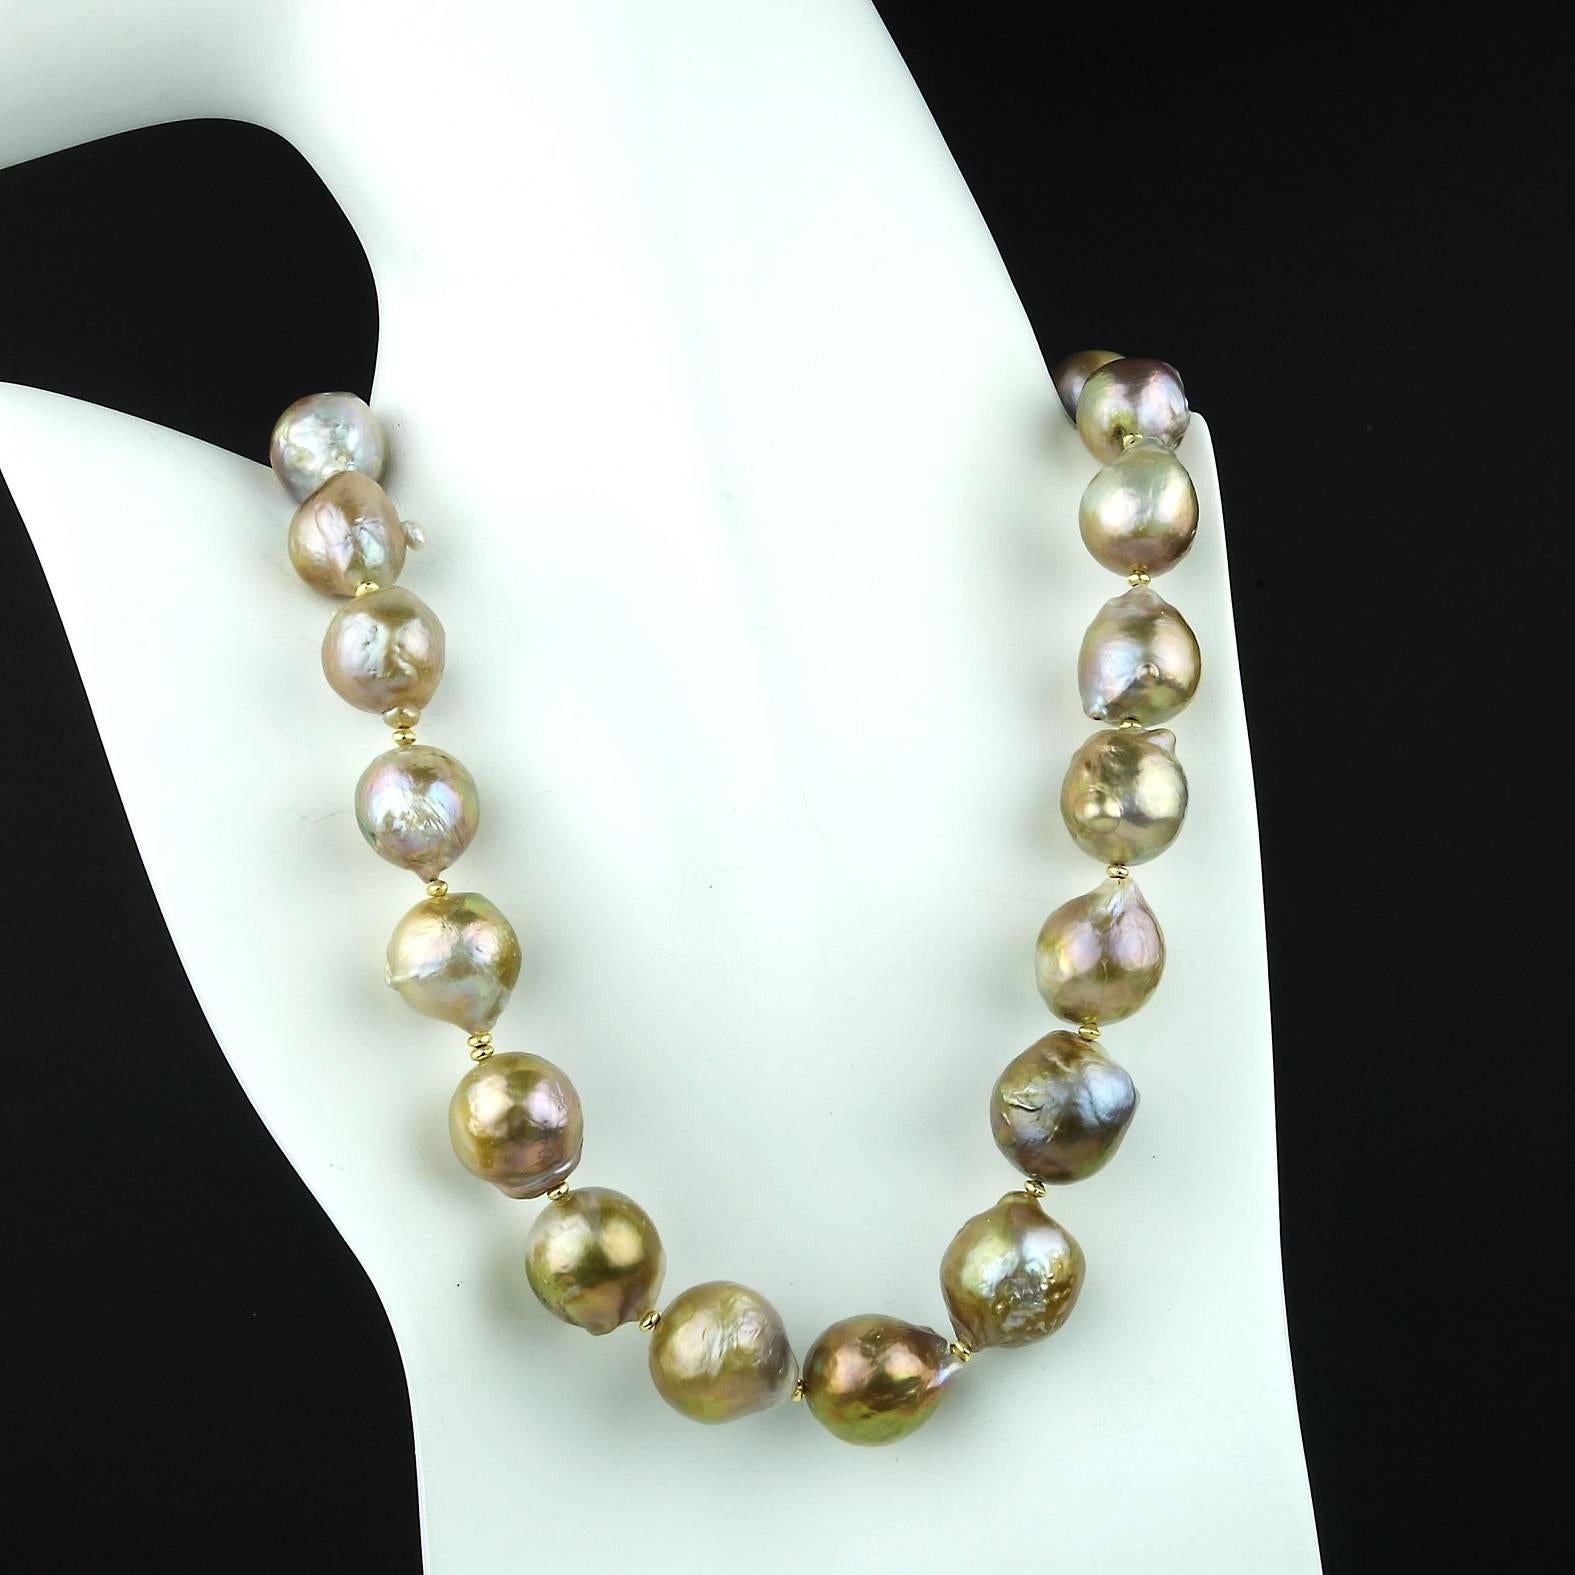 Glamorous Iridescent Wrinkle Pearl Necklace from Gemjunky 3